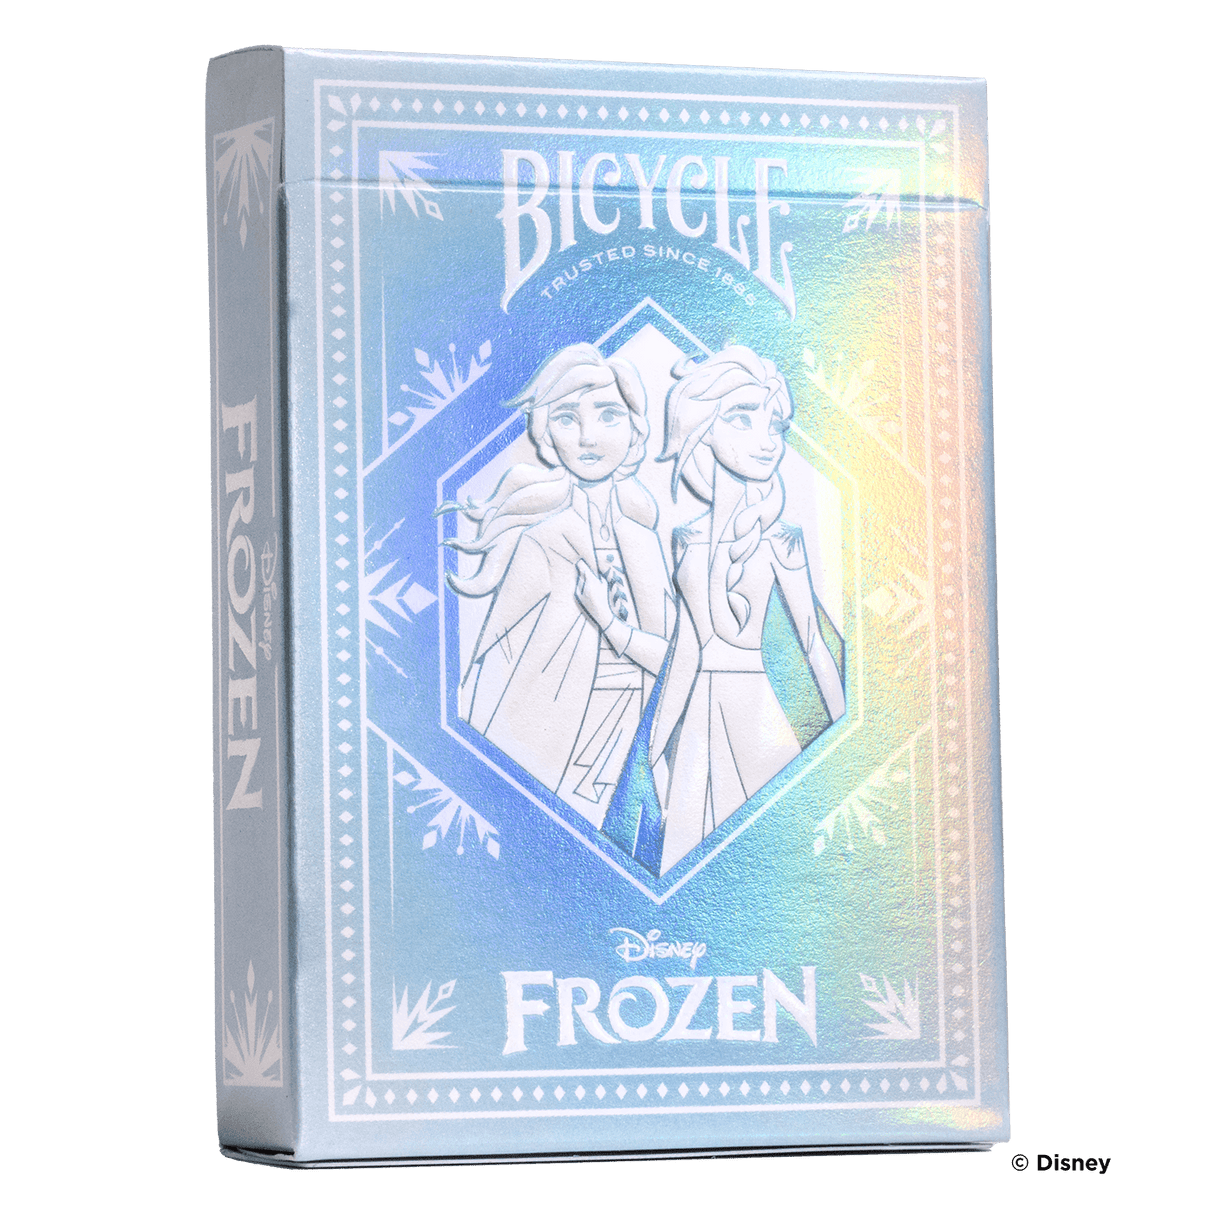 Bicycle Disney Frozen Inspired Playing Cards